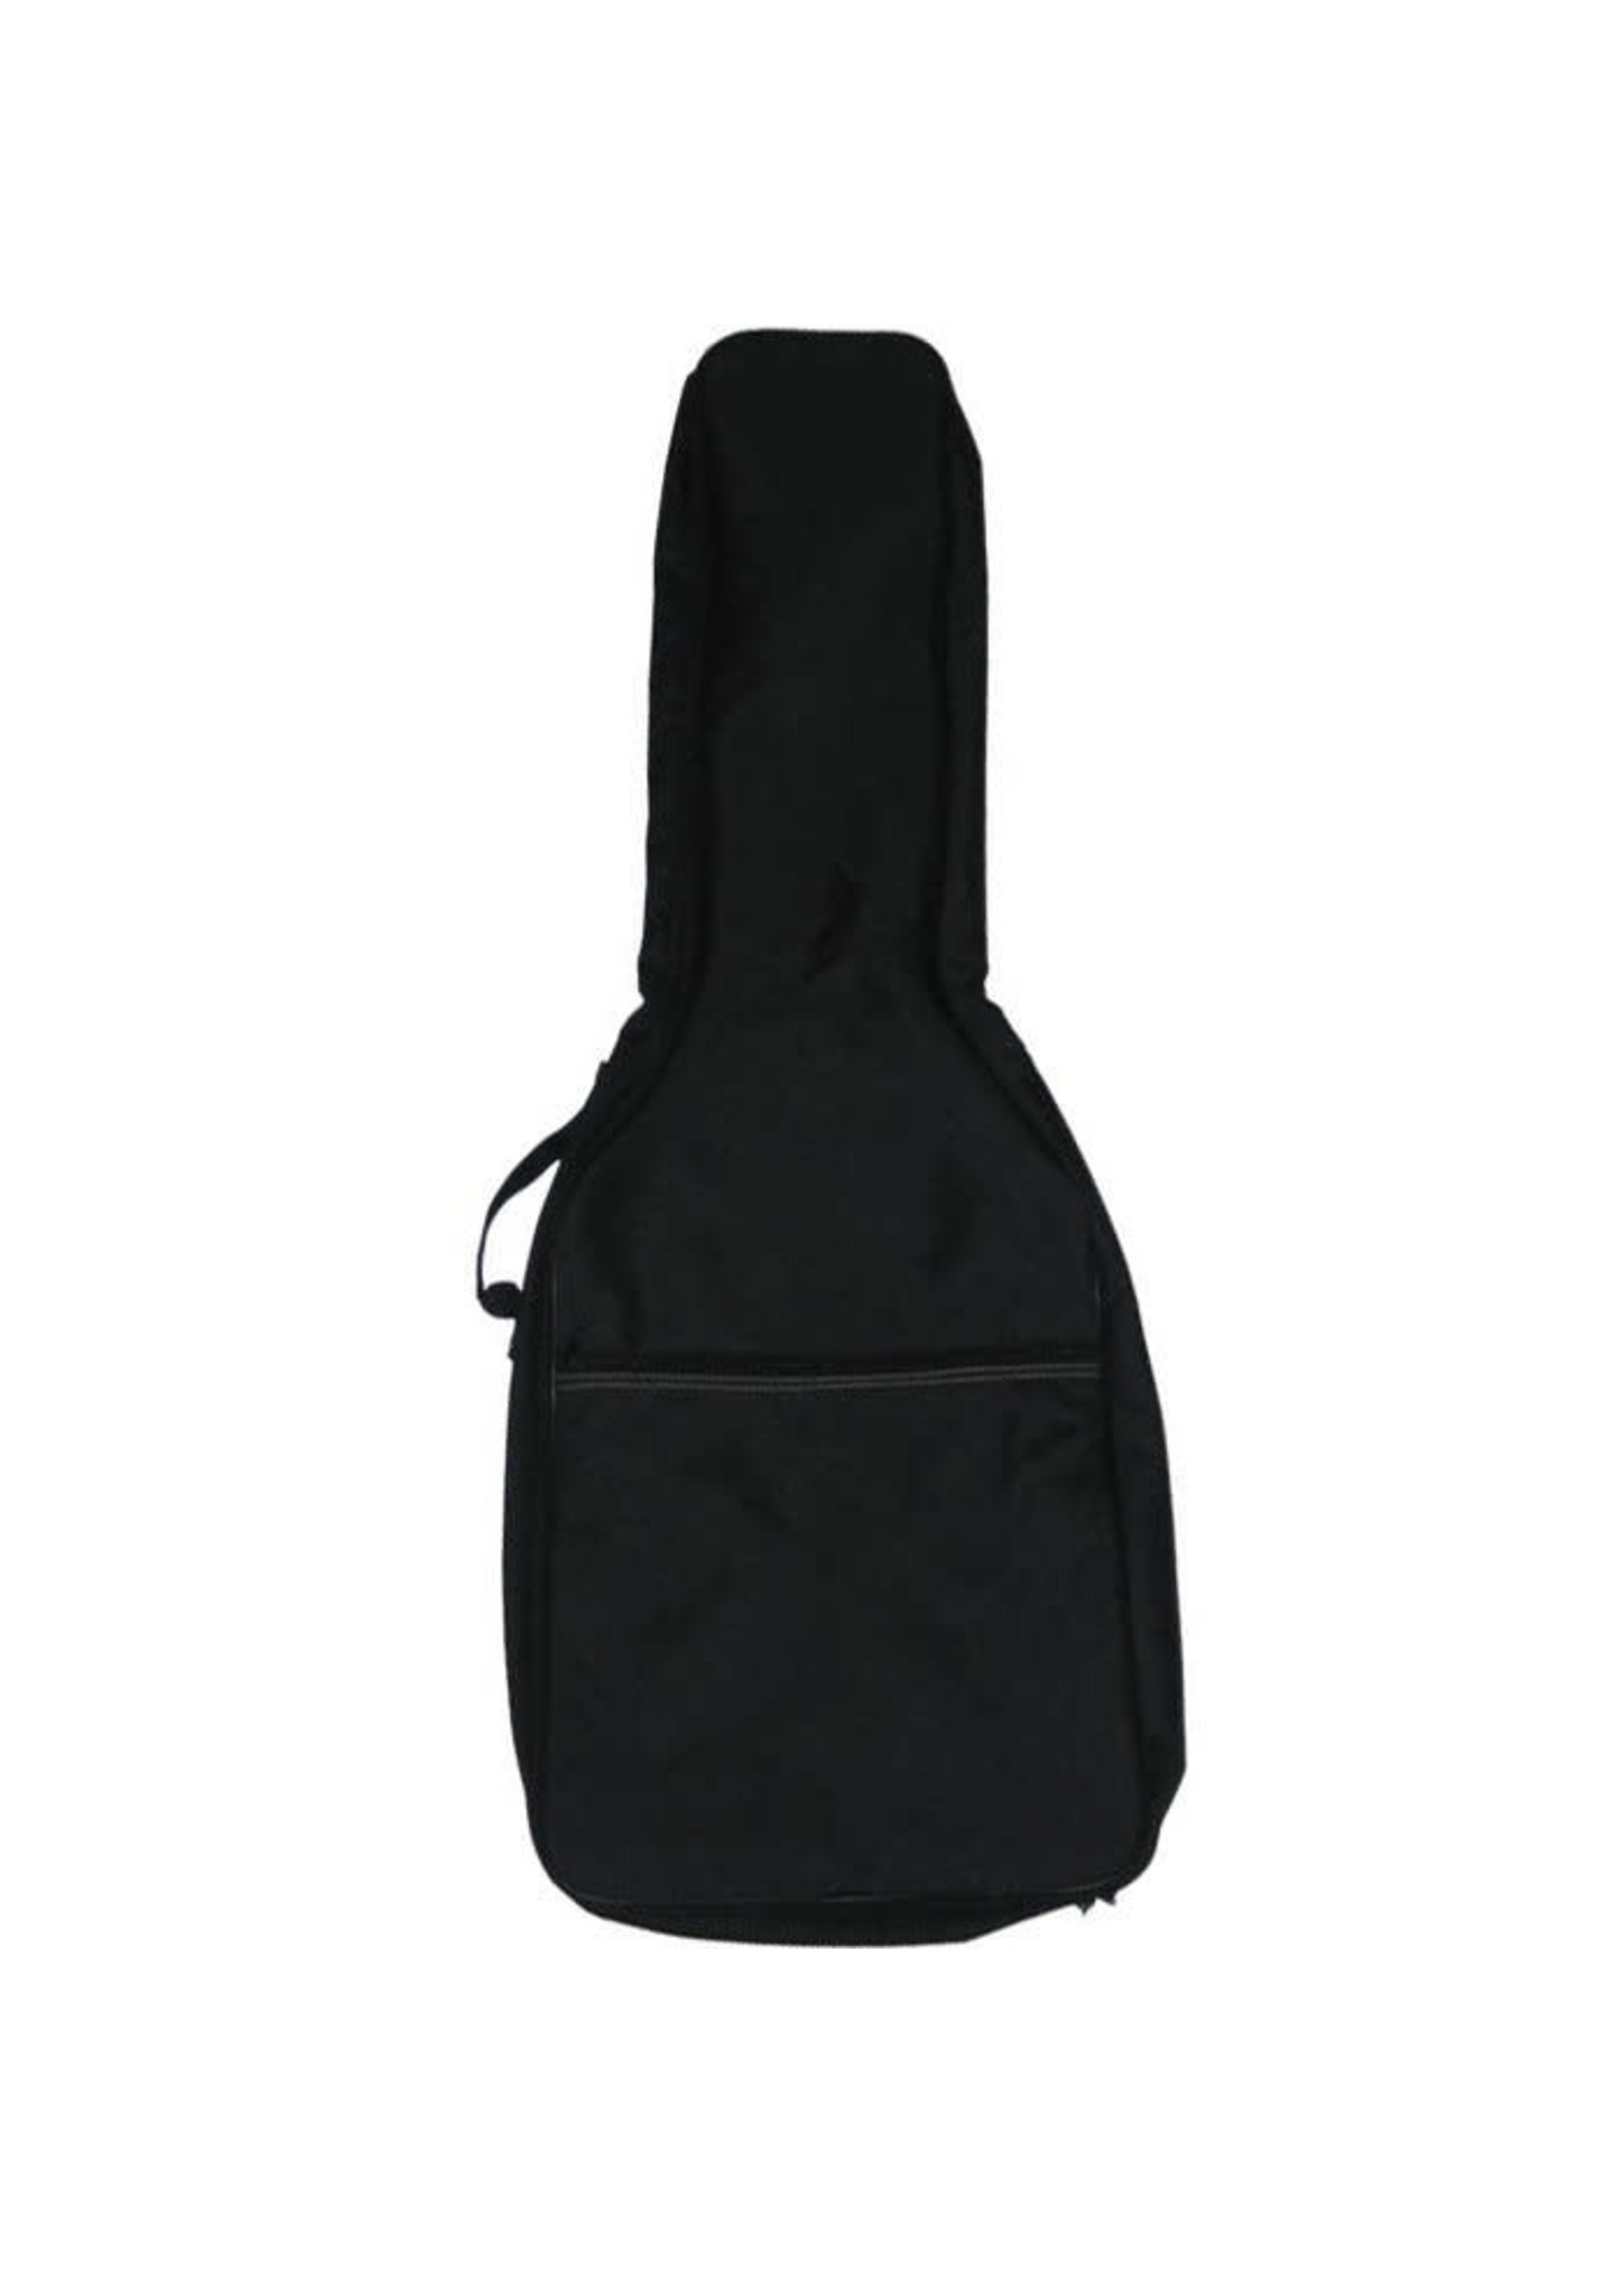 Solutions Solutions Padded Electric Guitar Bag SGB-E